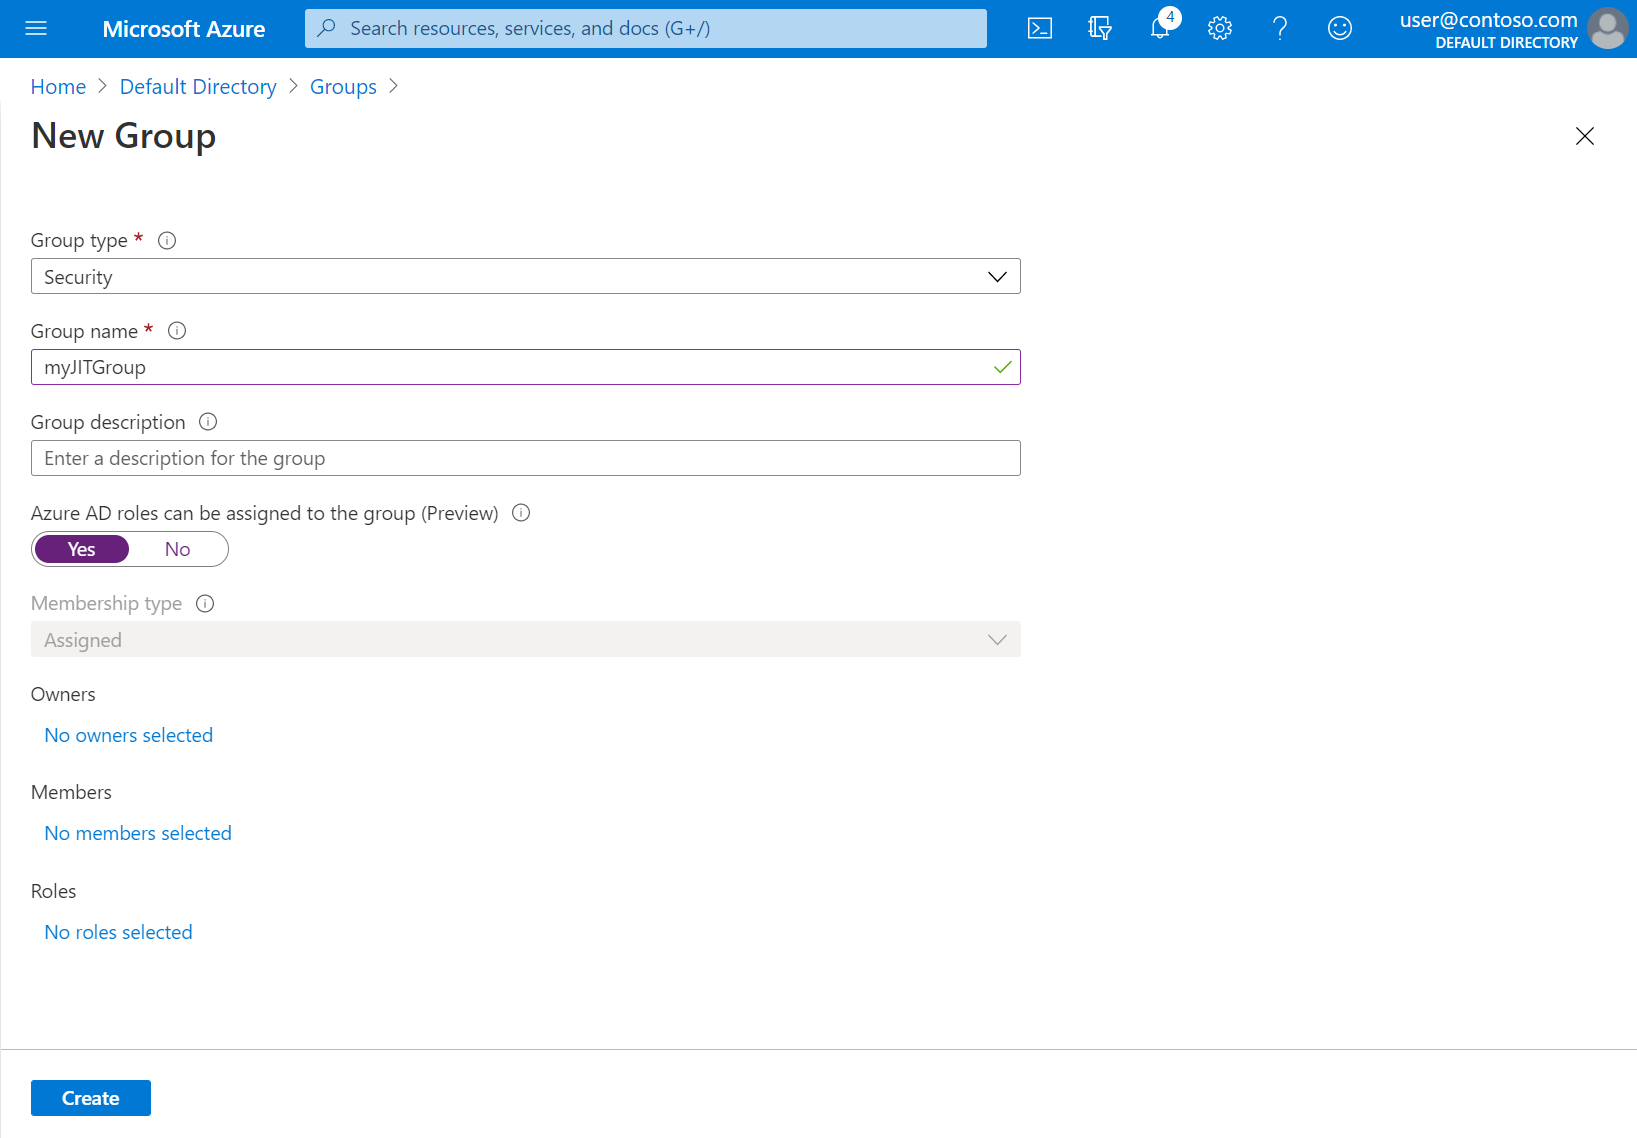 Screenshot of the new group creation screen in the Azure portal.